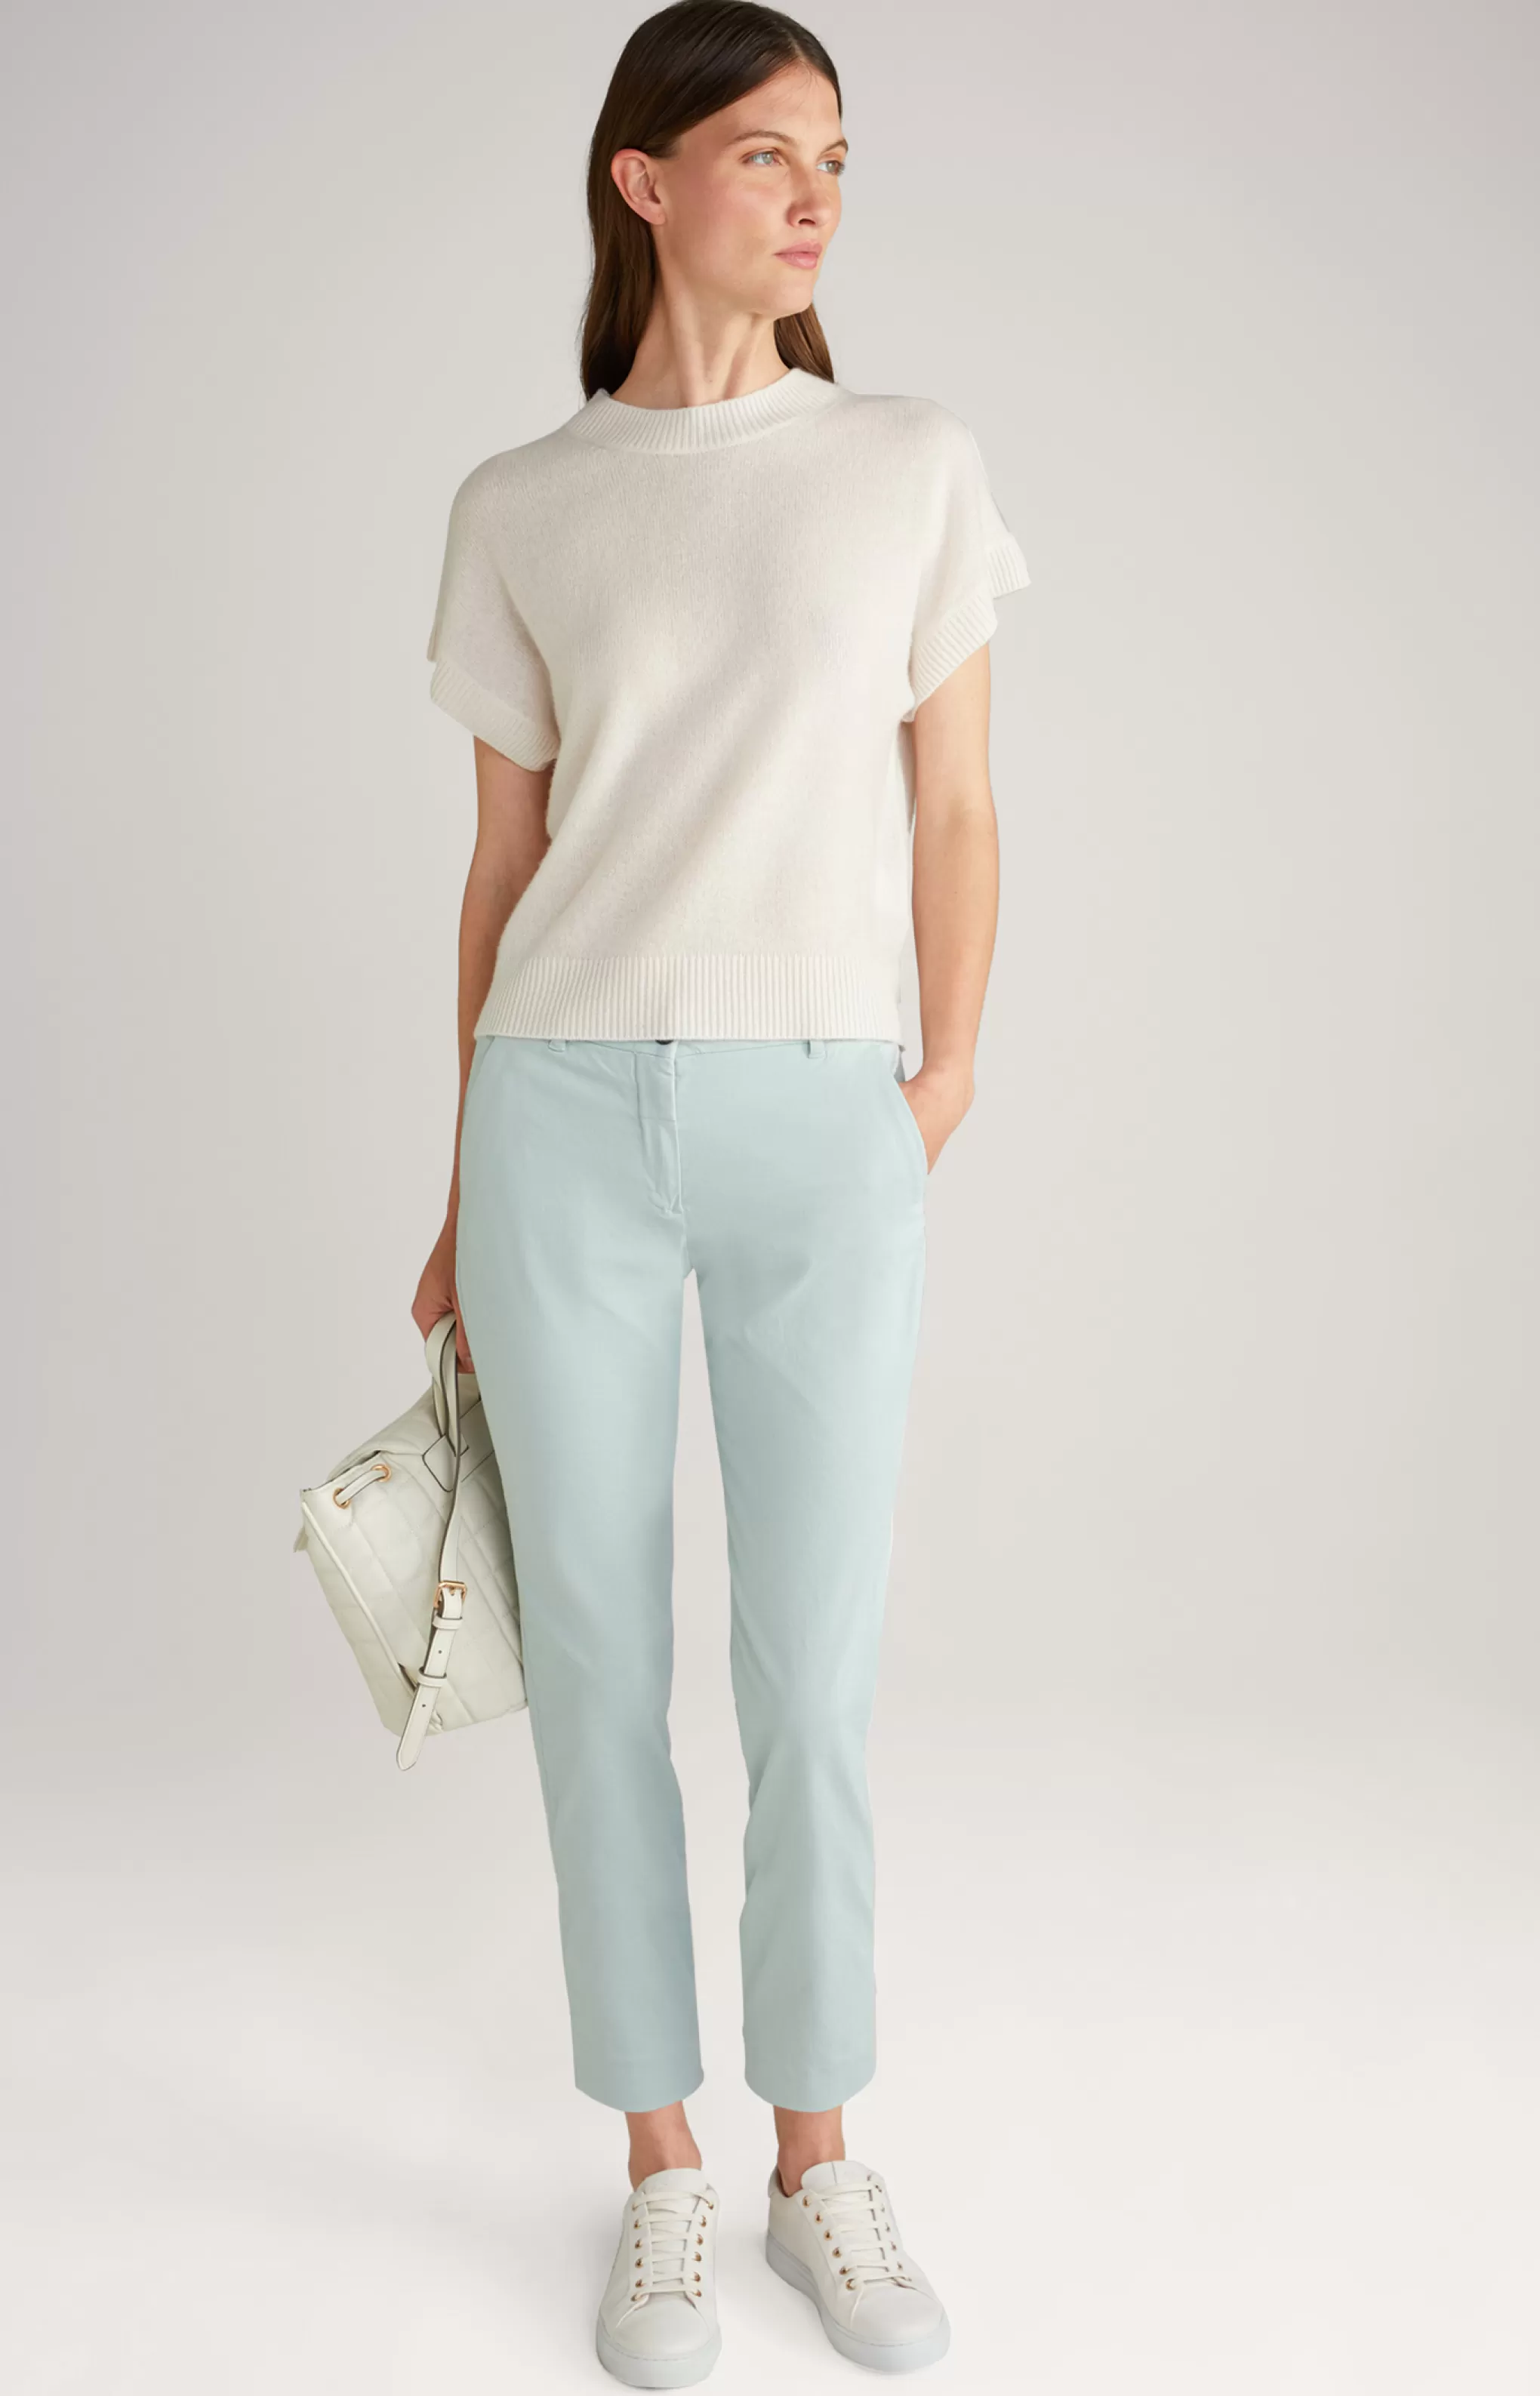 Trousers | Clothing*JOOP Trousers | Clothing Chinos in